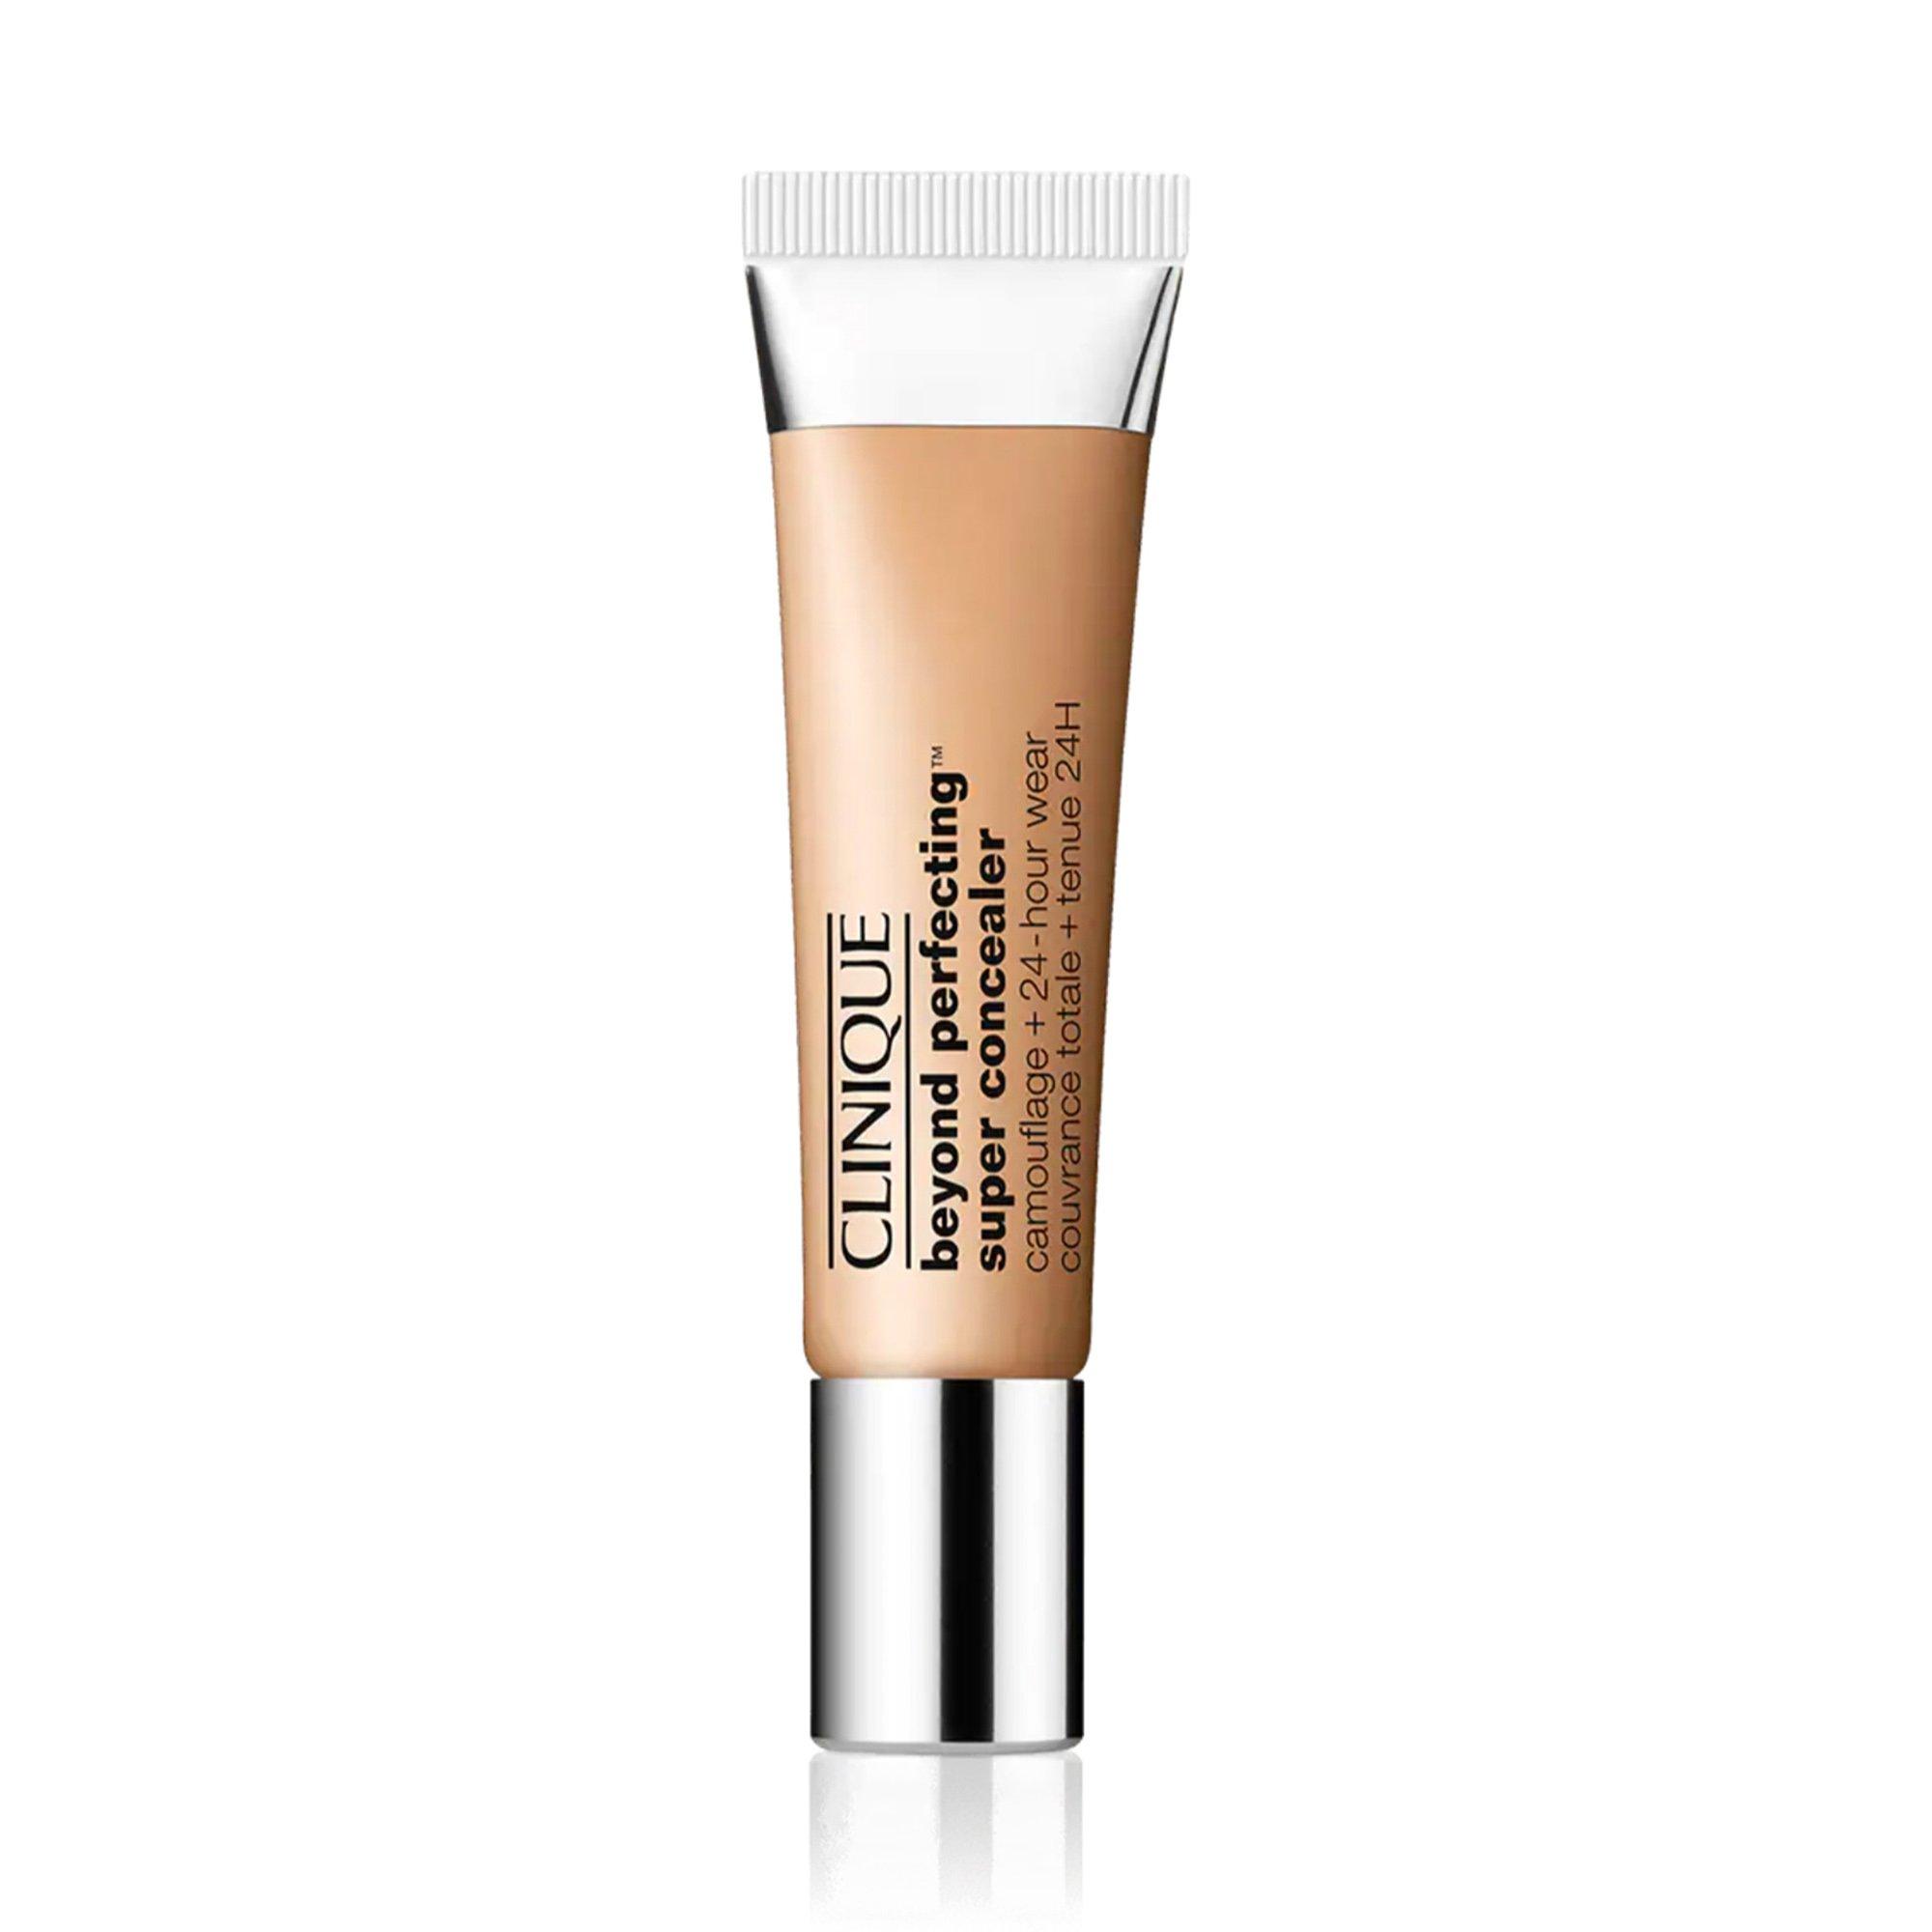 Image of CLINIQUE Beyond Perfecting BPS Concealer +24h Wear - 8ml